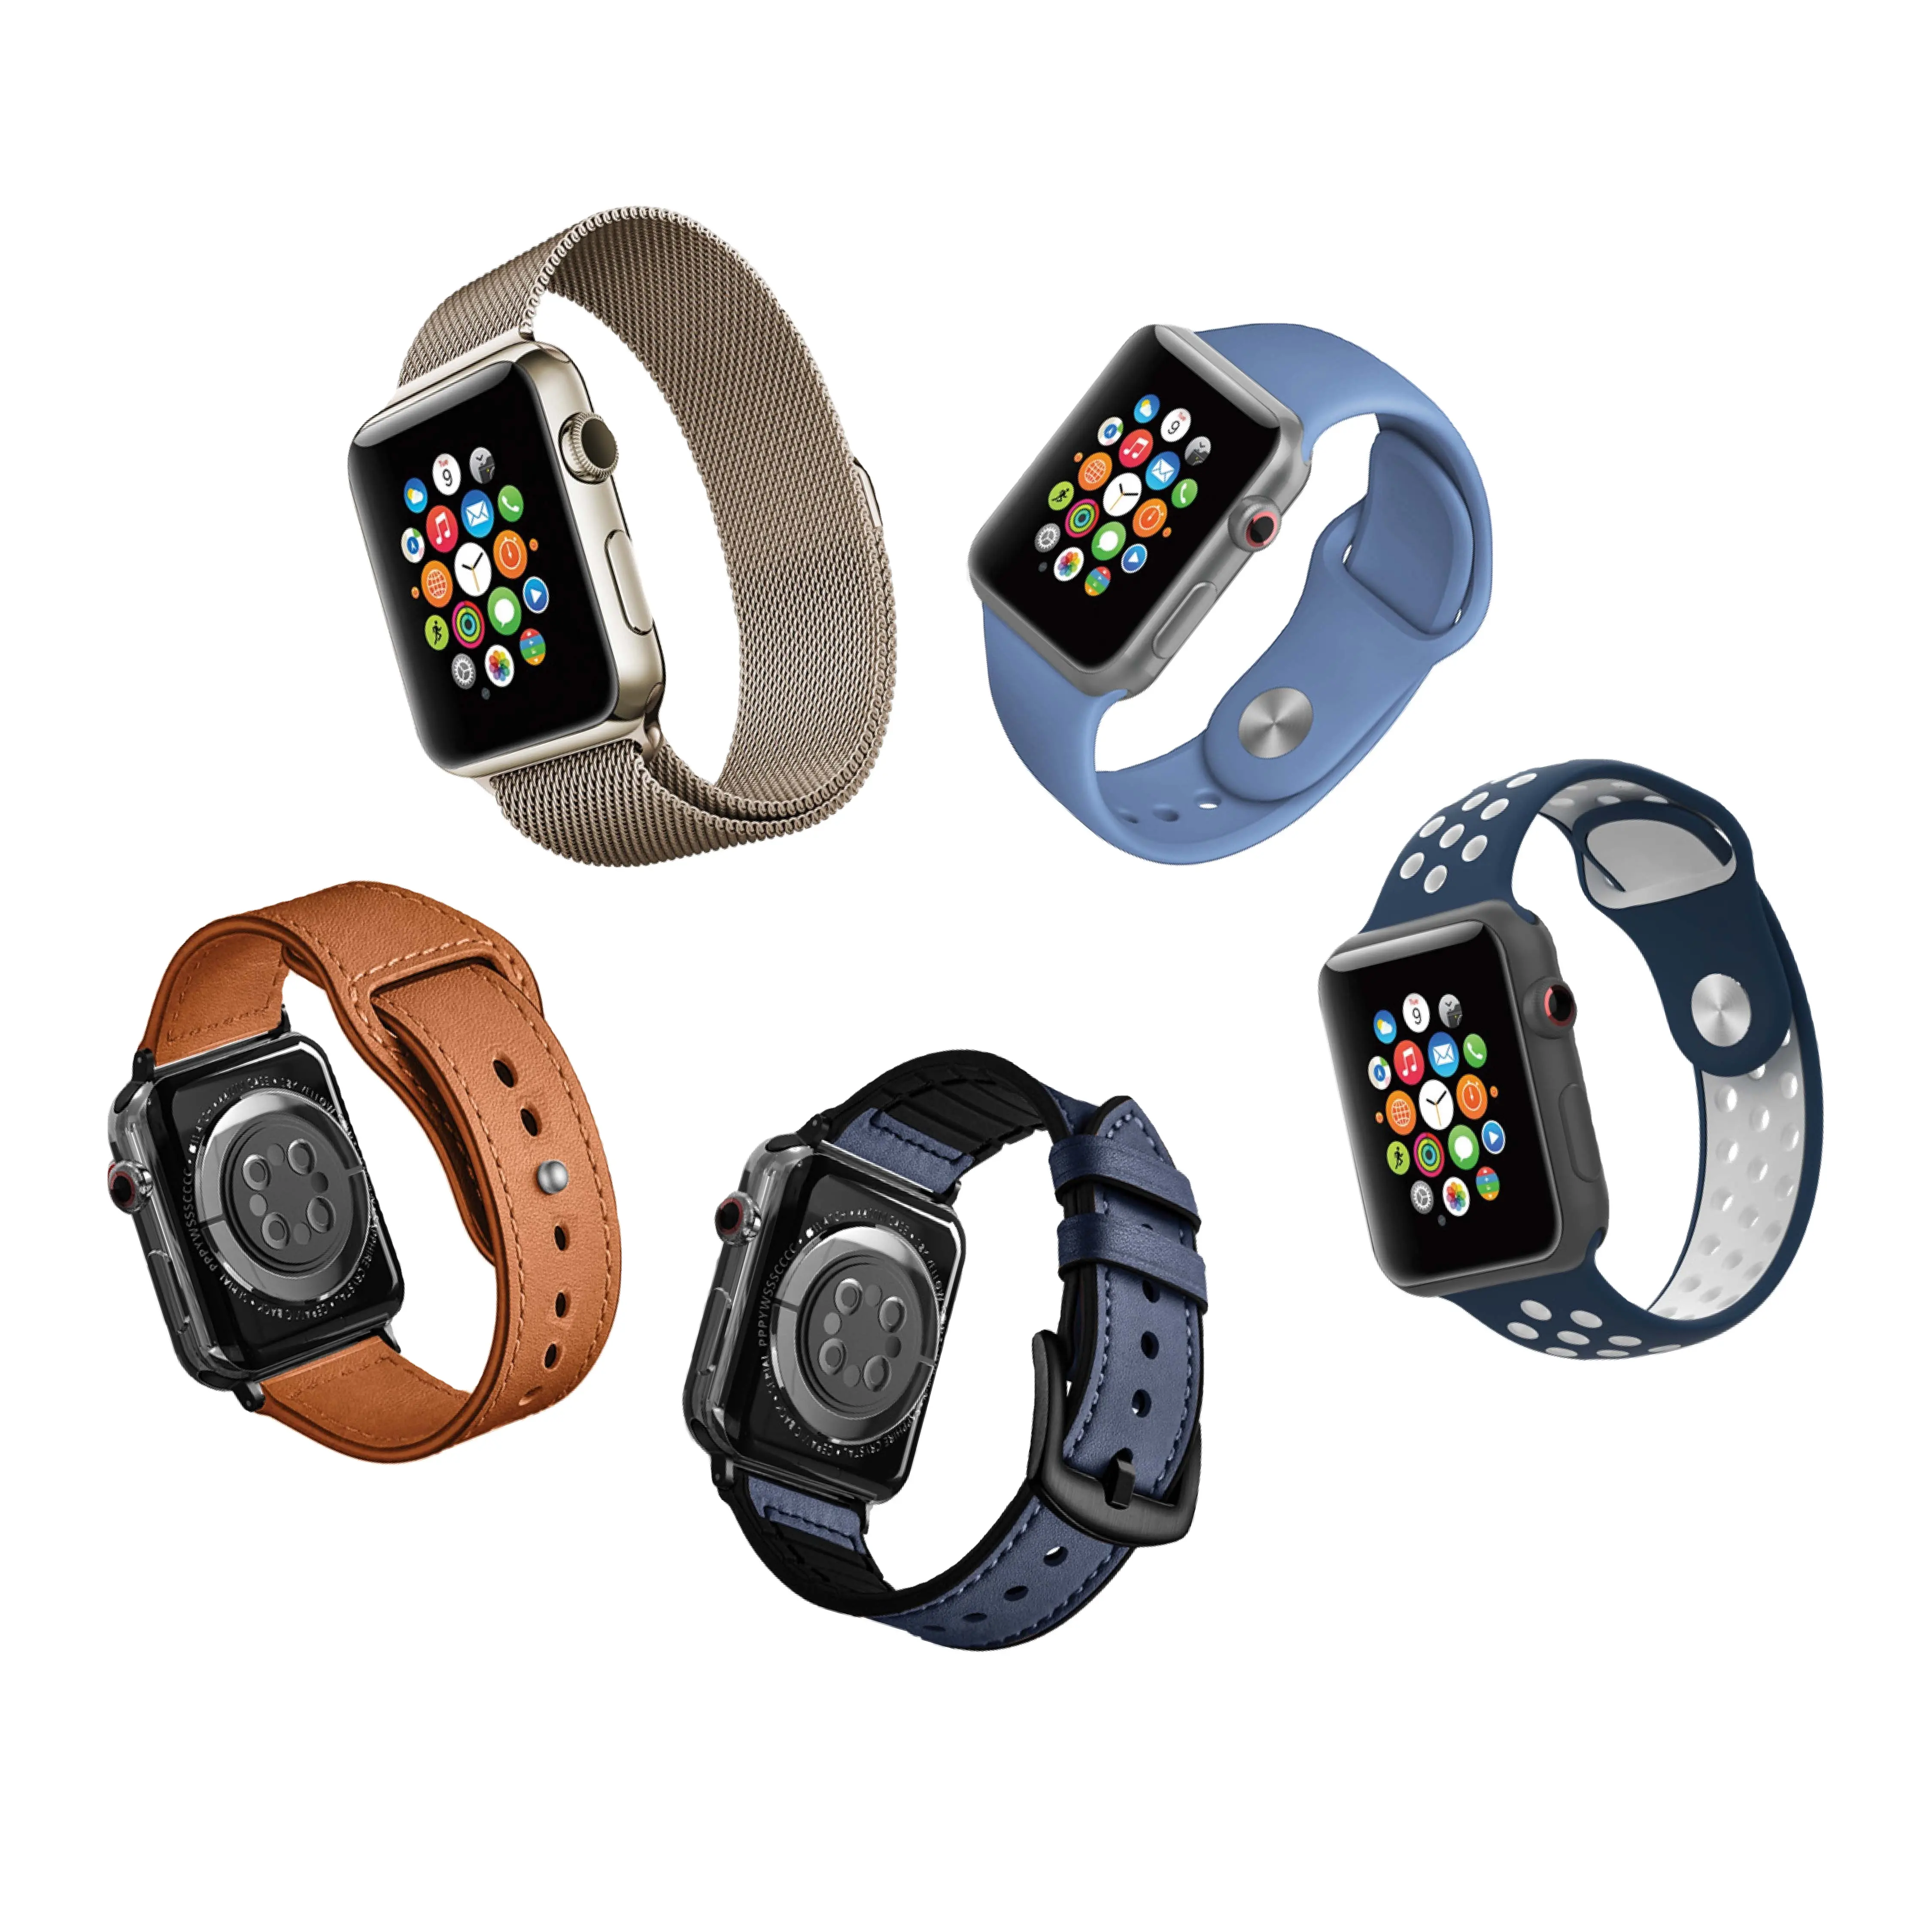 Hot selling iGuard watch straps bands for apple watch series 7, 6, 5, 4, SE Leather loop and silicone, High quality